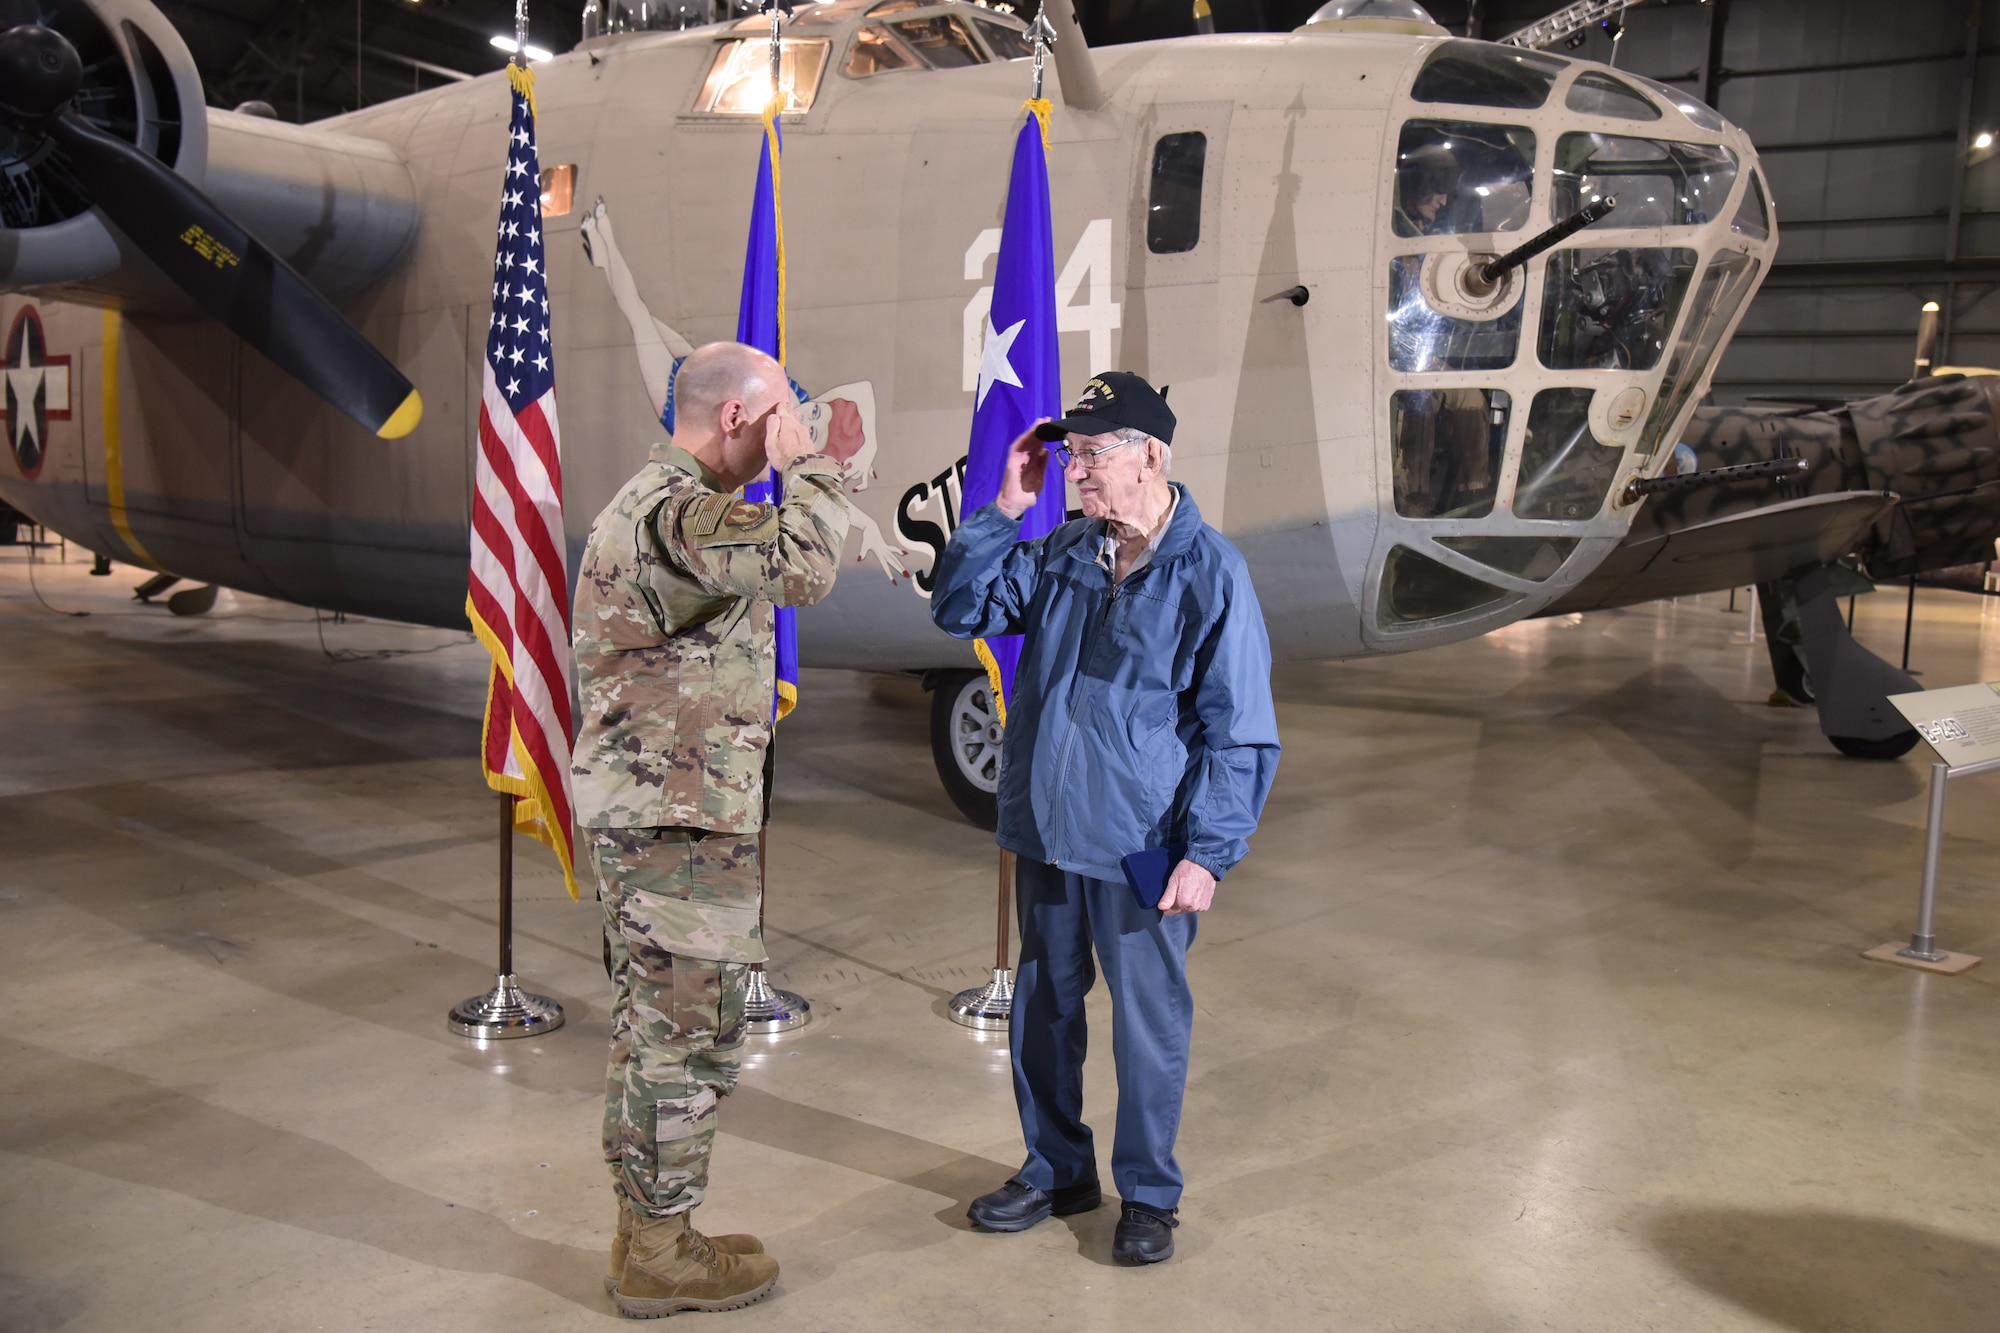 Maj. Gen. Carl Schaefer, Air Force Materiel Command deputy commander, renders a salute to 93-year-old World War II veteran 1st Lt. Joseph Kollenberg after a ceremony at the National Museum of the United States Air Force, July 24. Schaefer presented Kollenberg with the  Distinguished Flying Cross, the Air Medal with three Oak Leaf Clusters, and the European, African, and Middle Eastern campaign service medals to replace those misplaced in the 70 years since the veteran left active duty service. (Air Force photo/Ken LaRock)